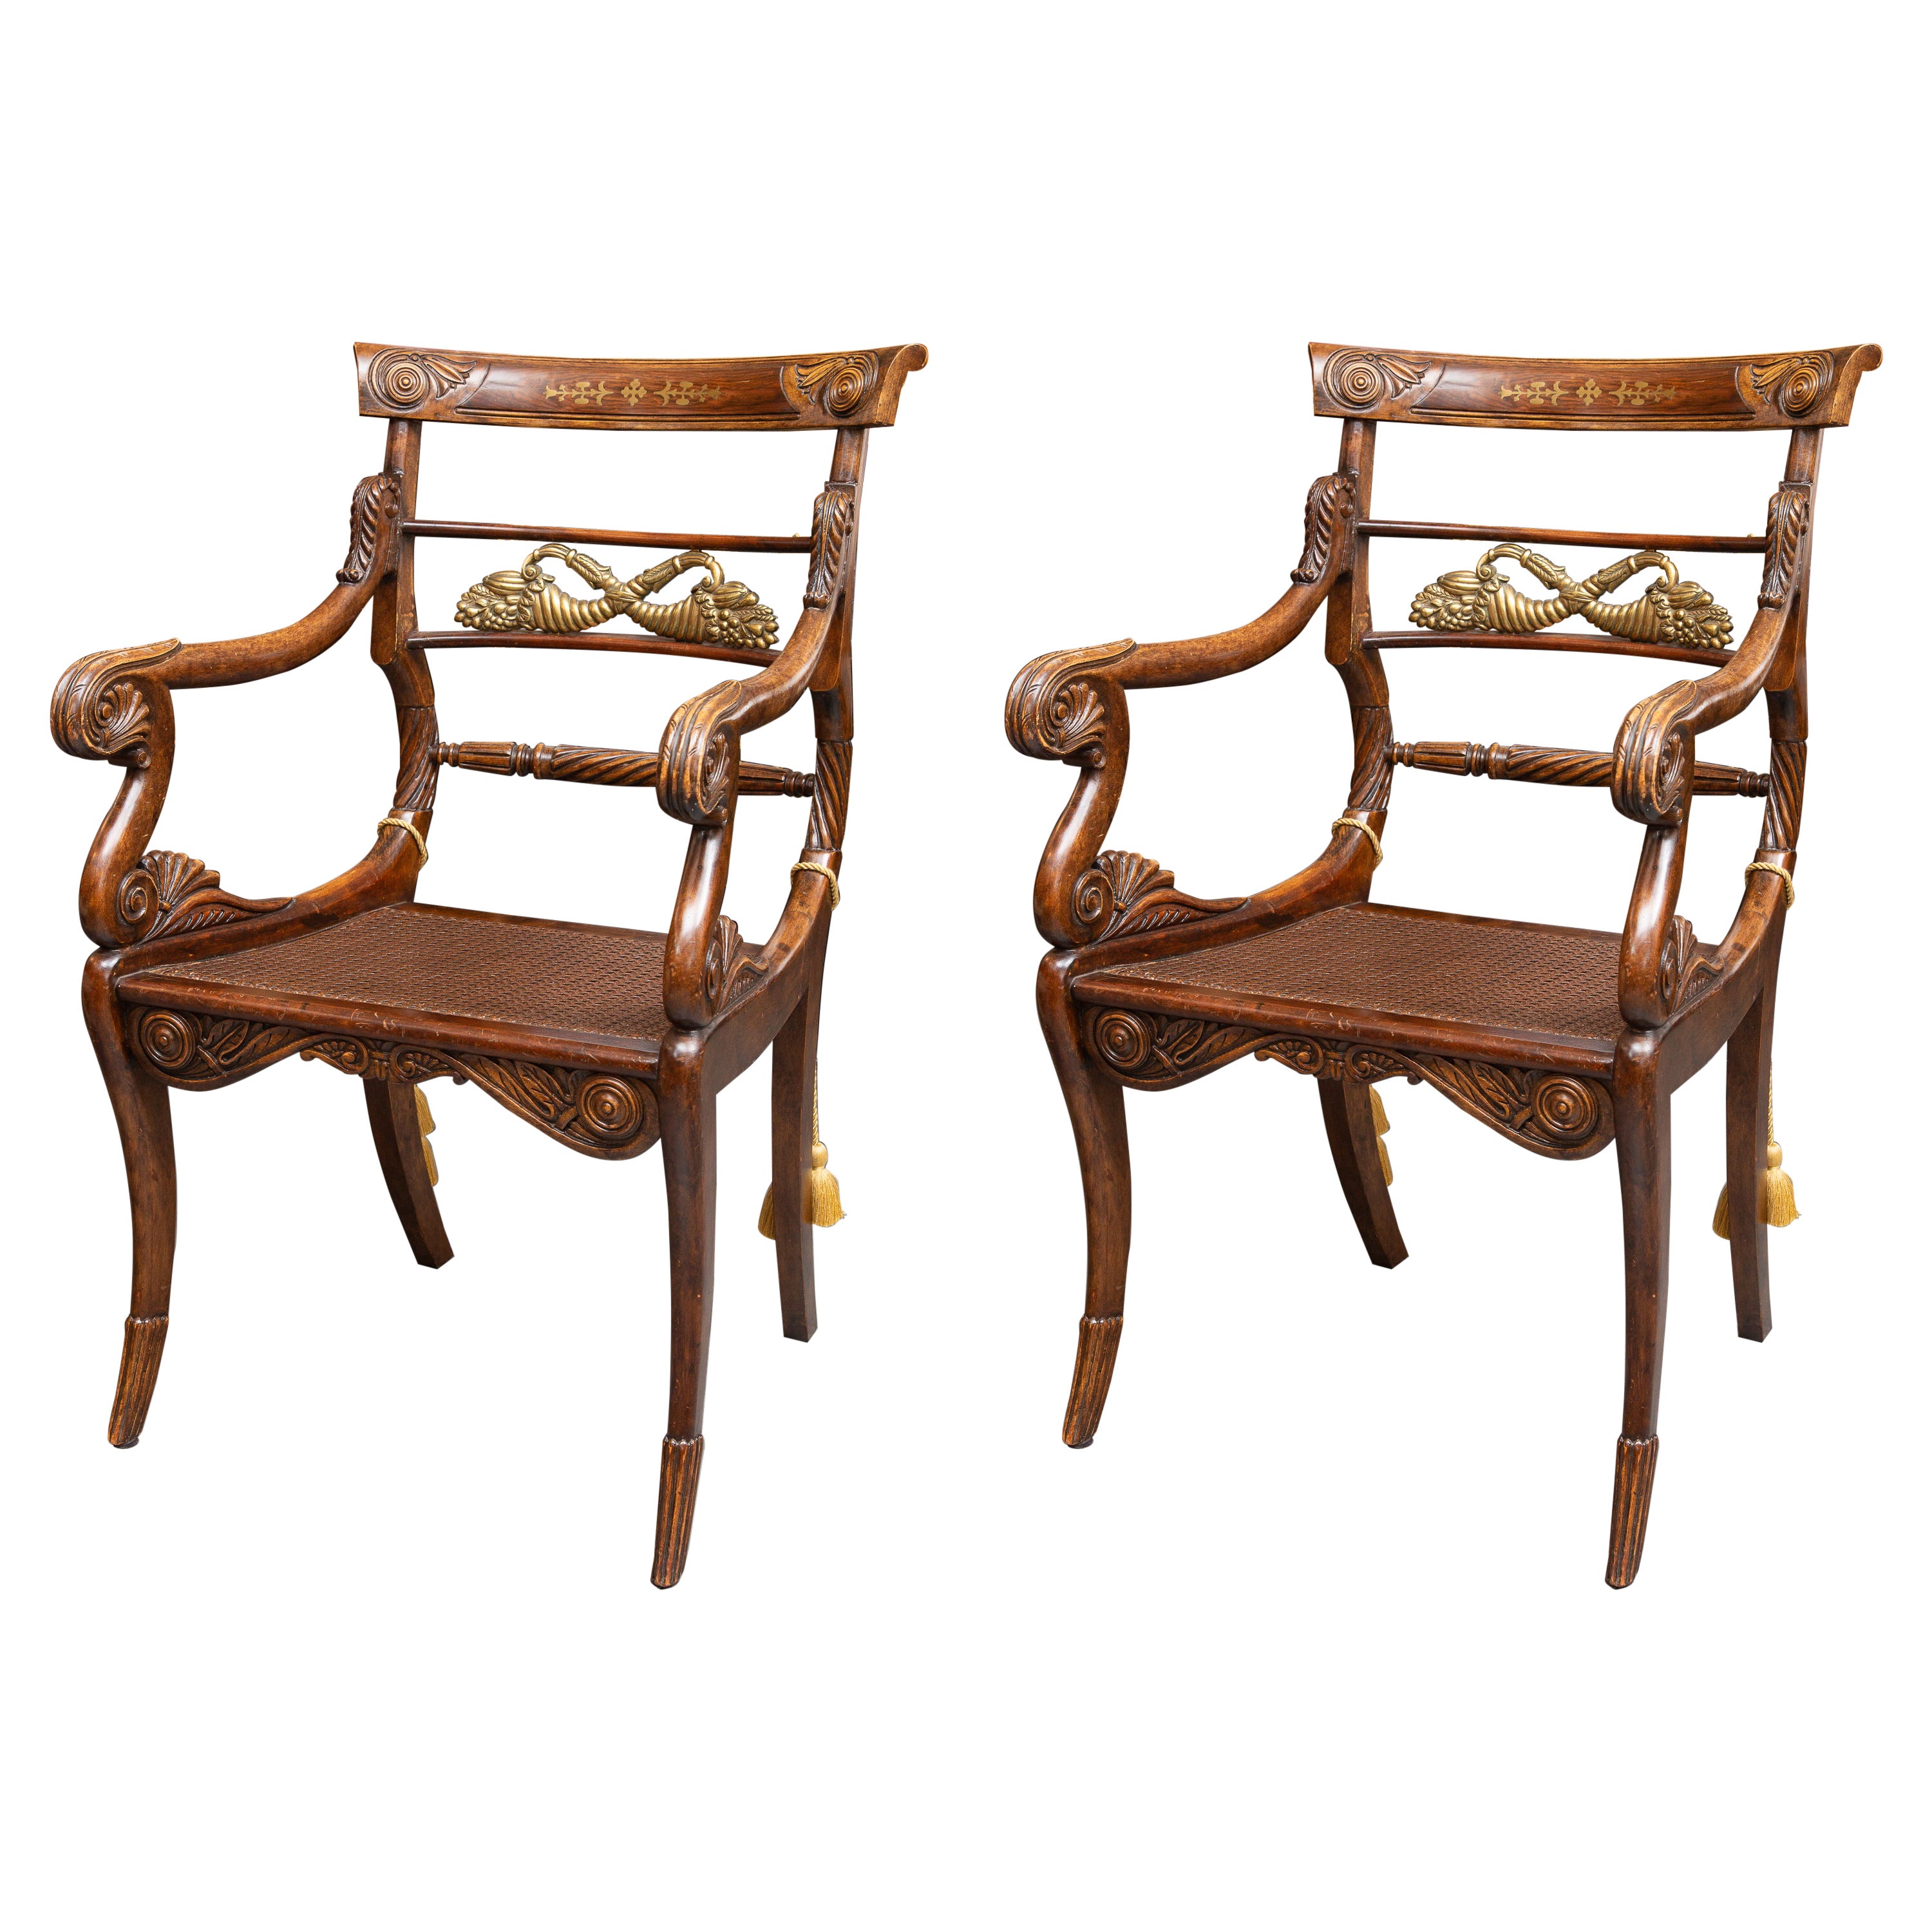 Pair of 19th Century English Regency Mahogany Arm Chairs For Sale